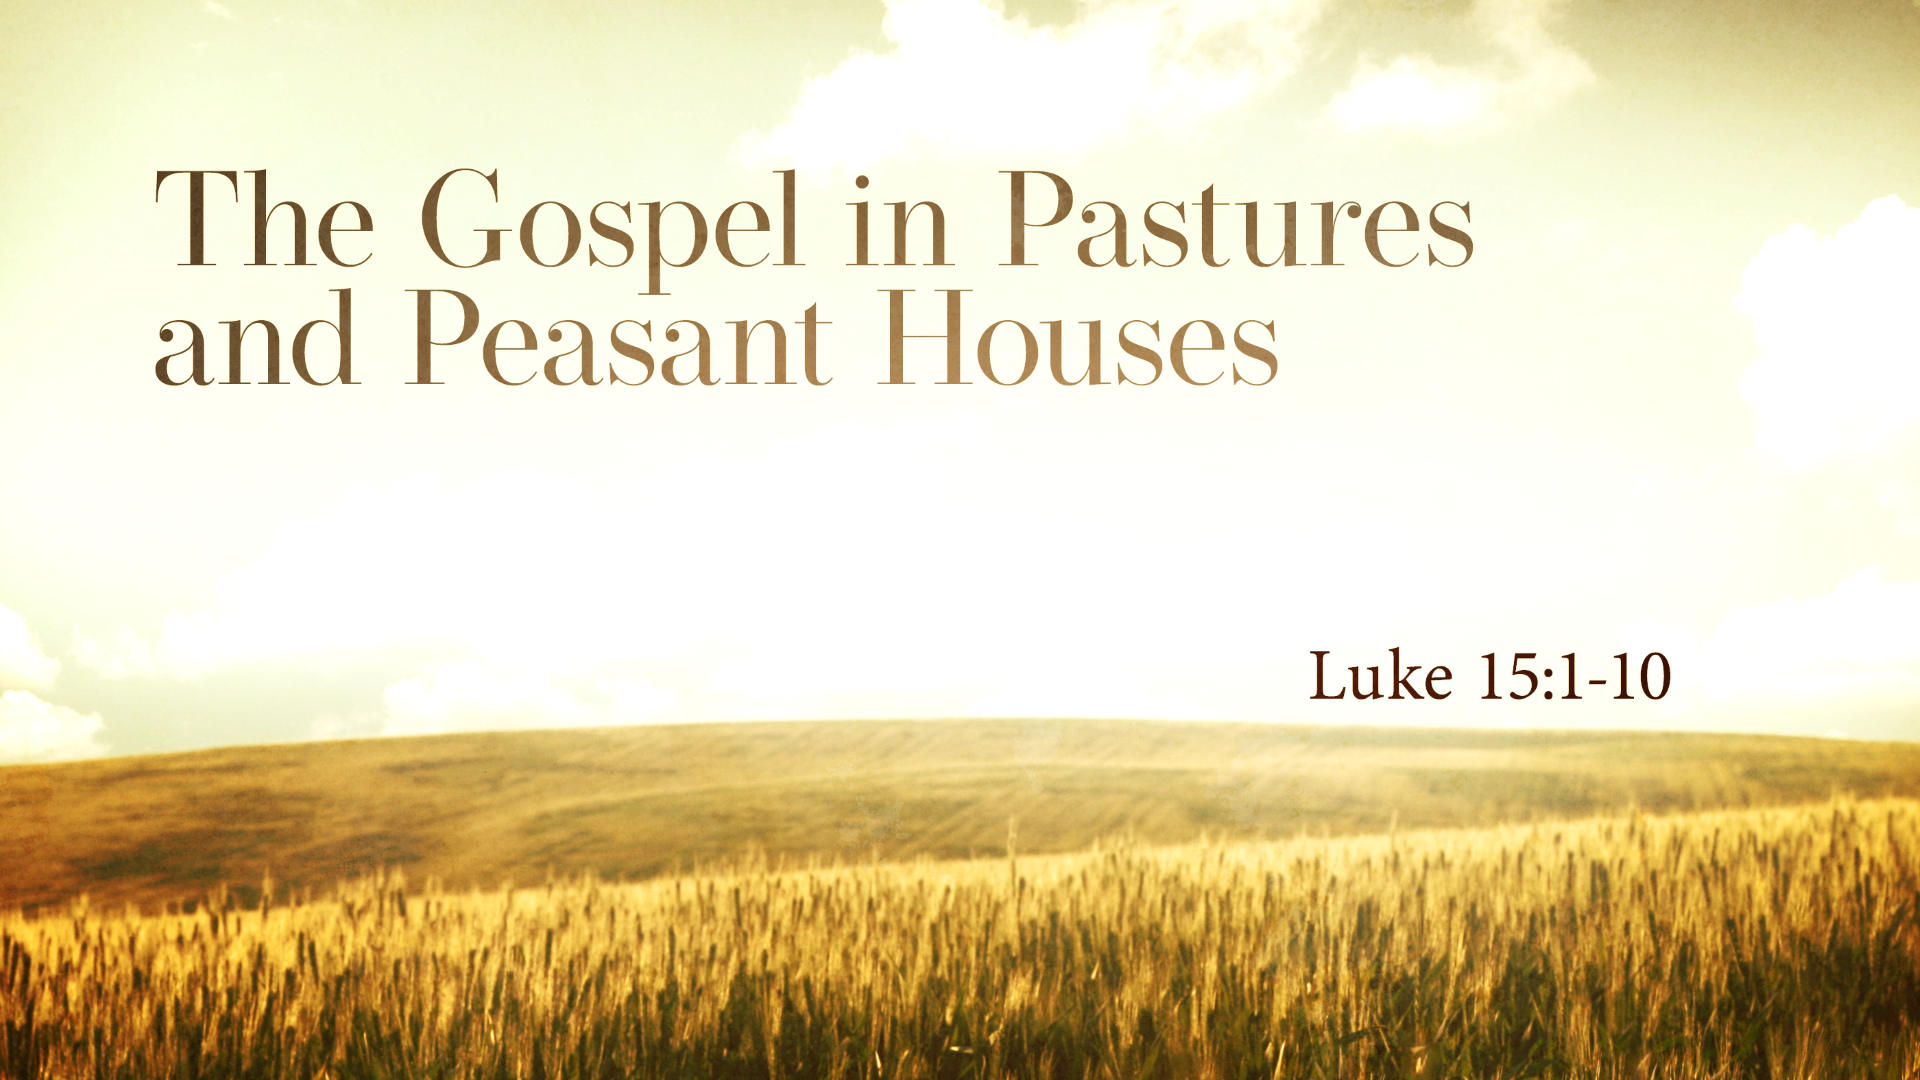 The Gospel In Pastures And Peasant Houses